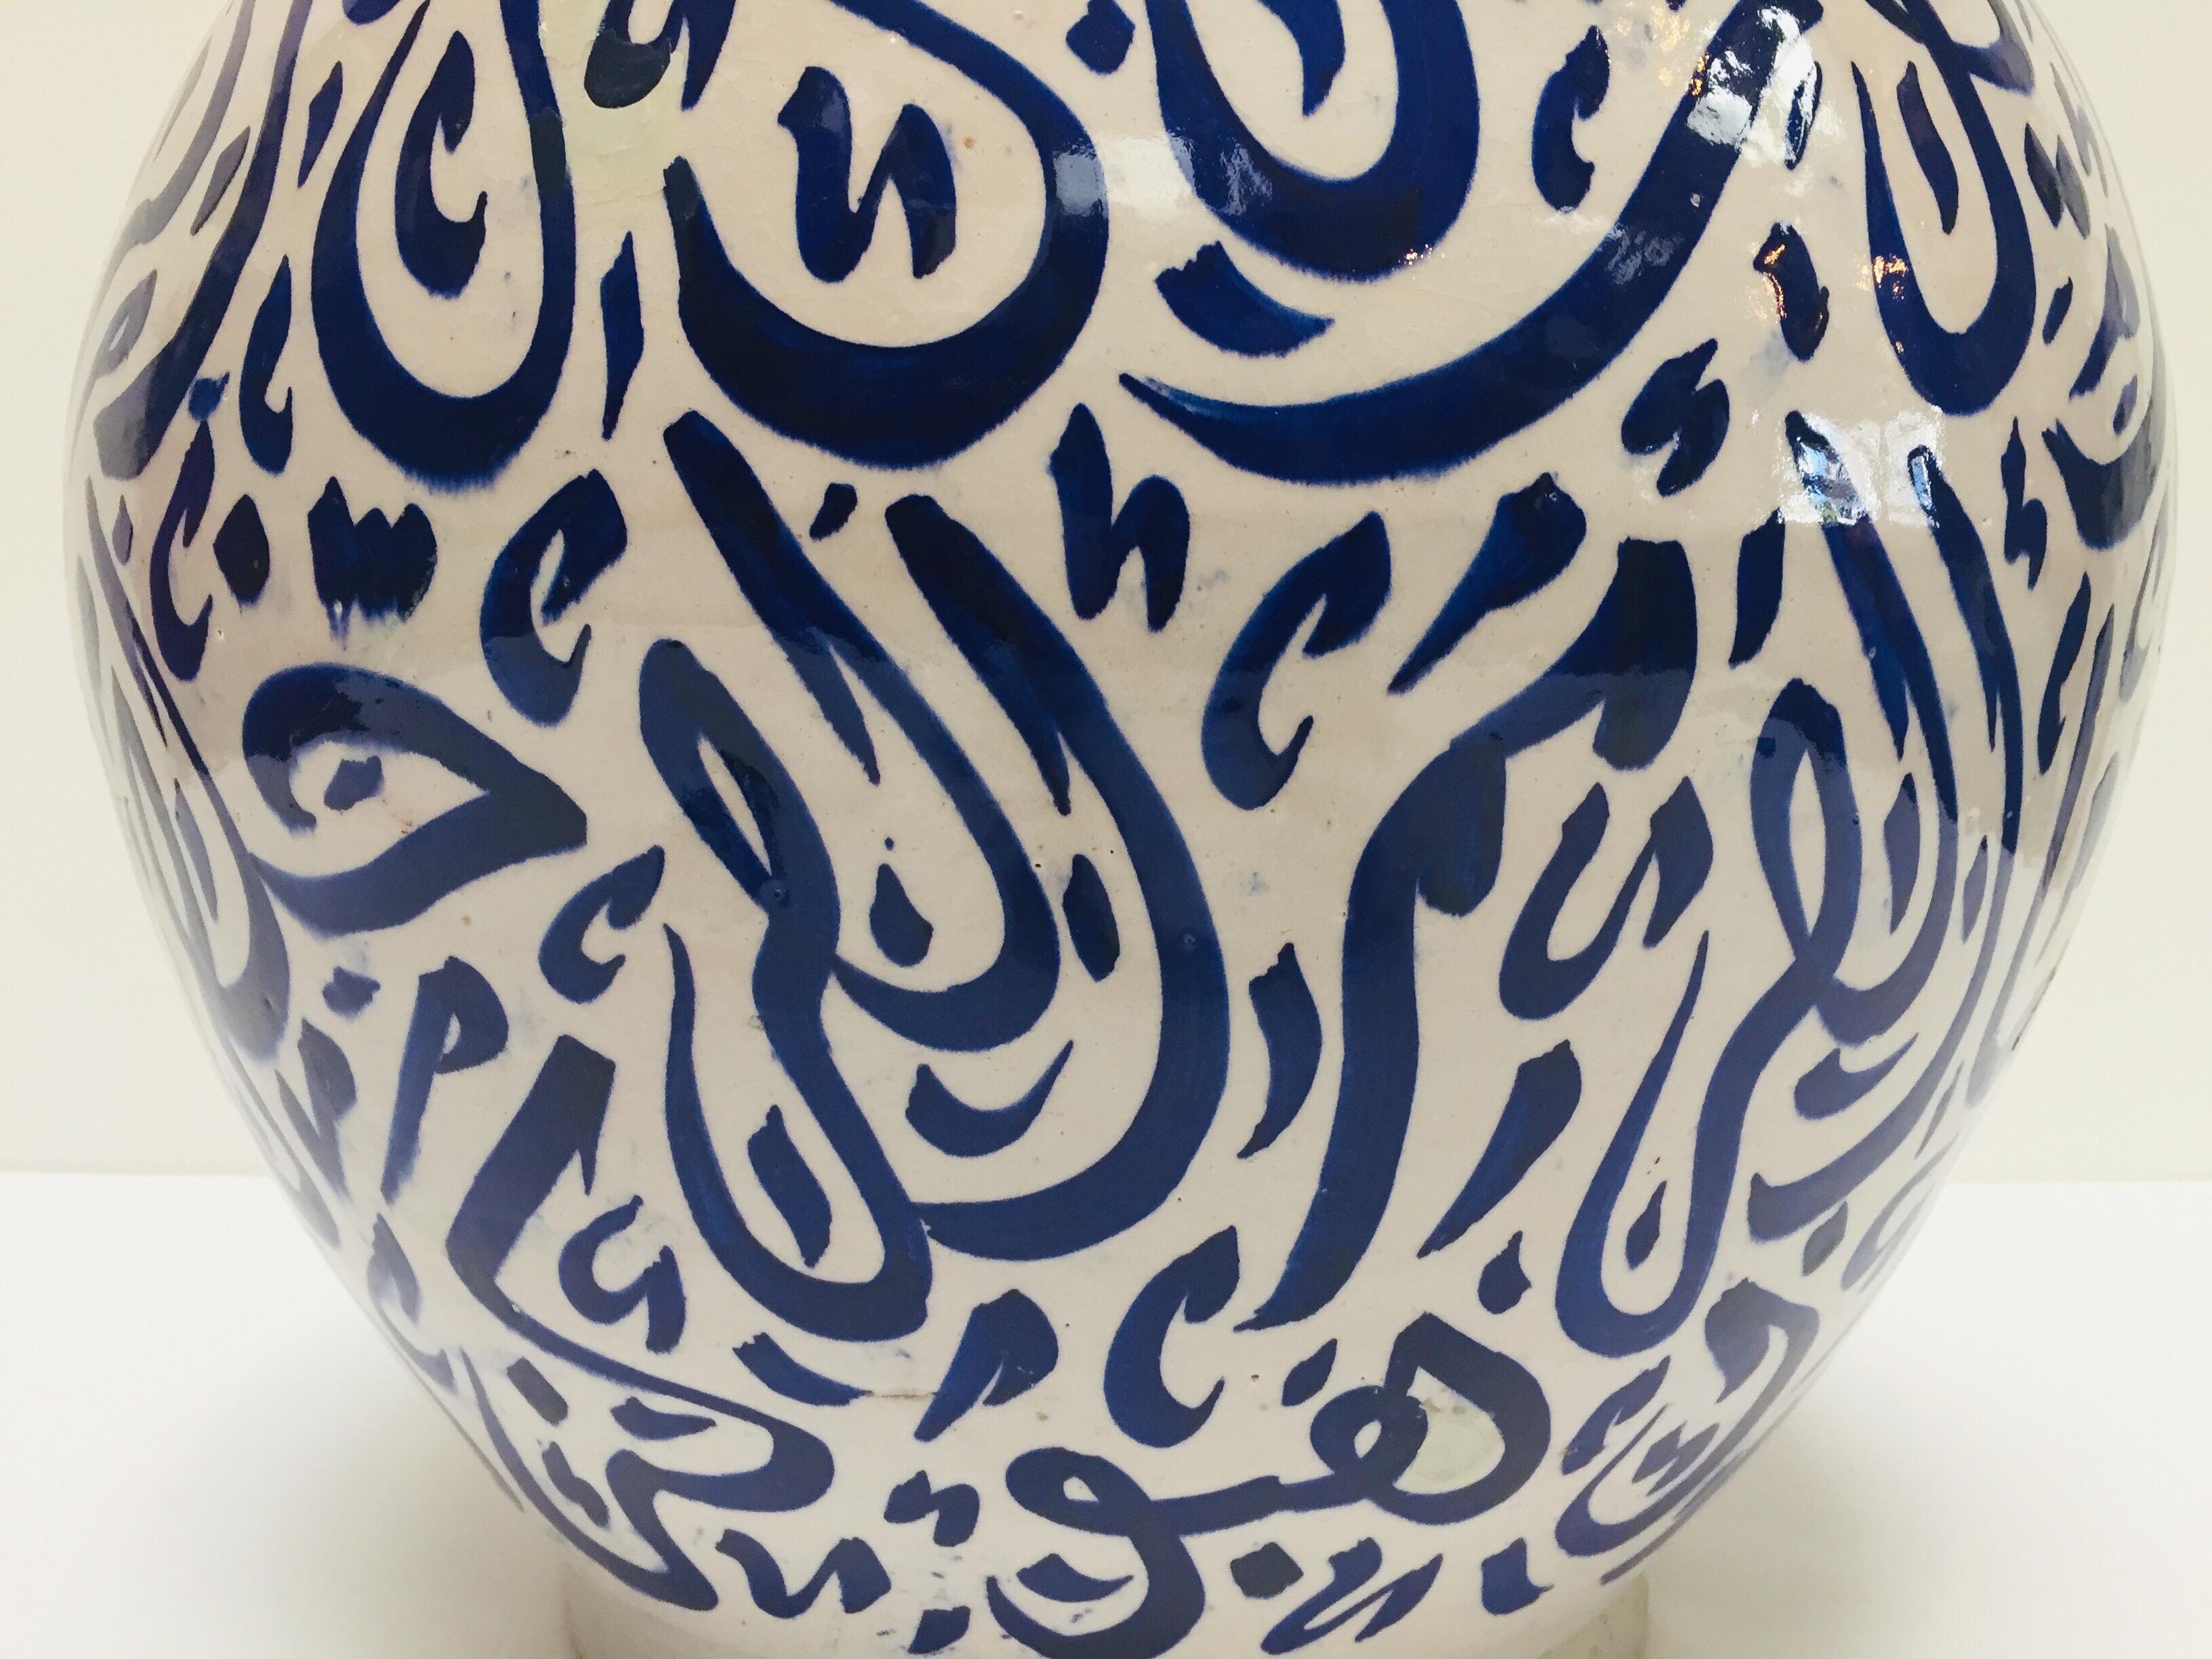 Hand-Painted Moroccan Blue Ceramic Lidded Urn with Arabic Calligraphy Writing, Fez For Sale